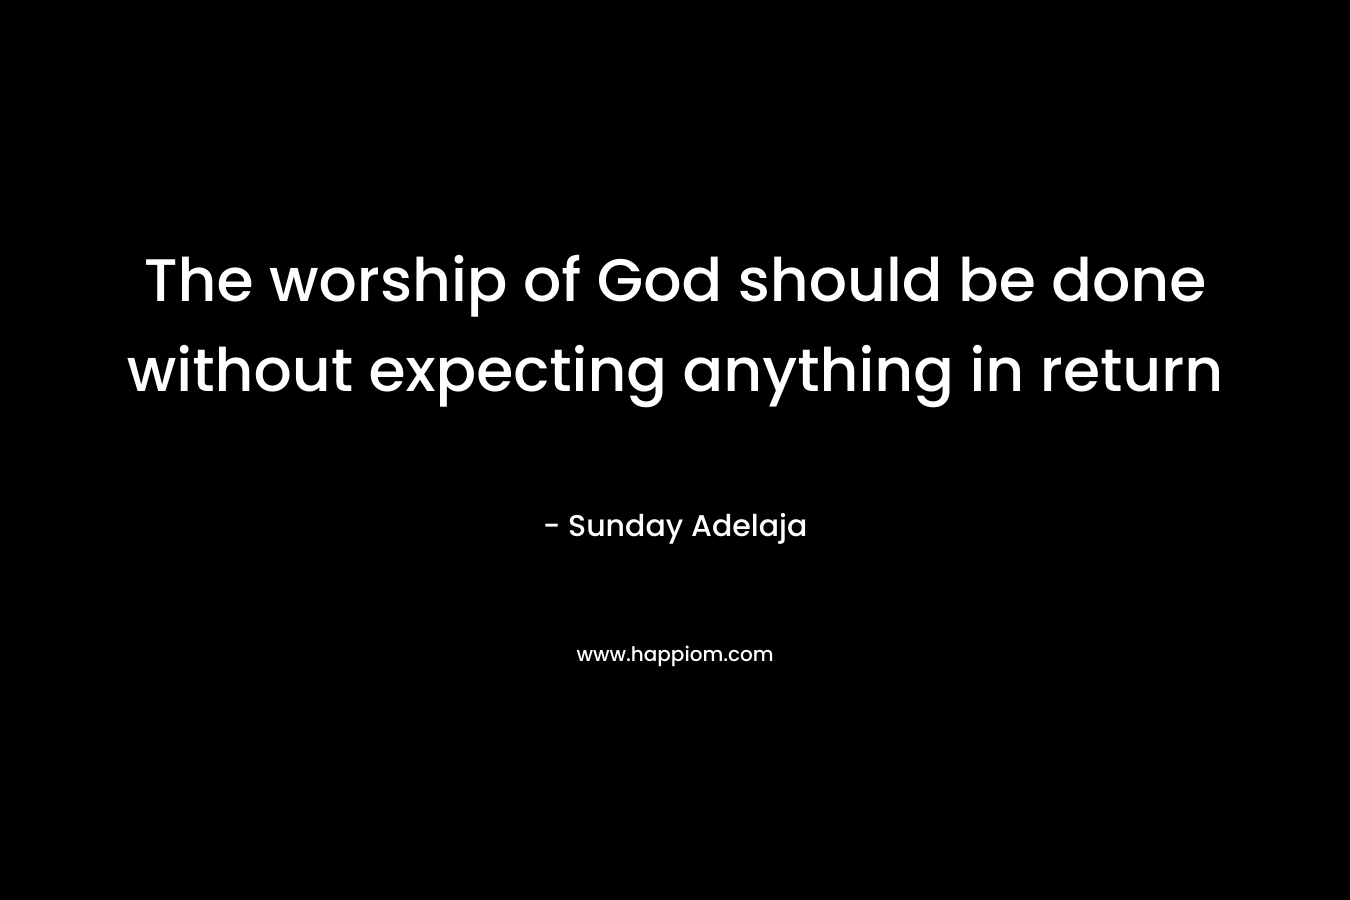 The worship of God should be done without expecting anything in return